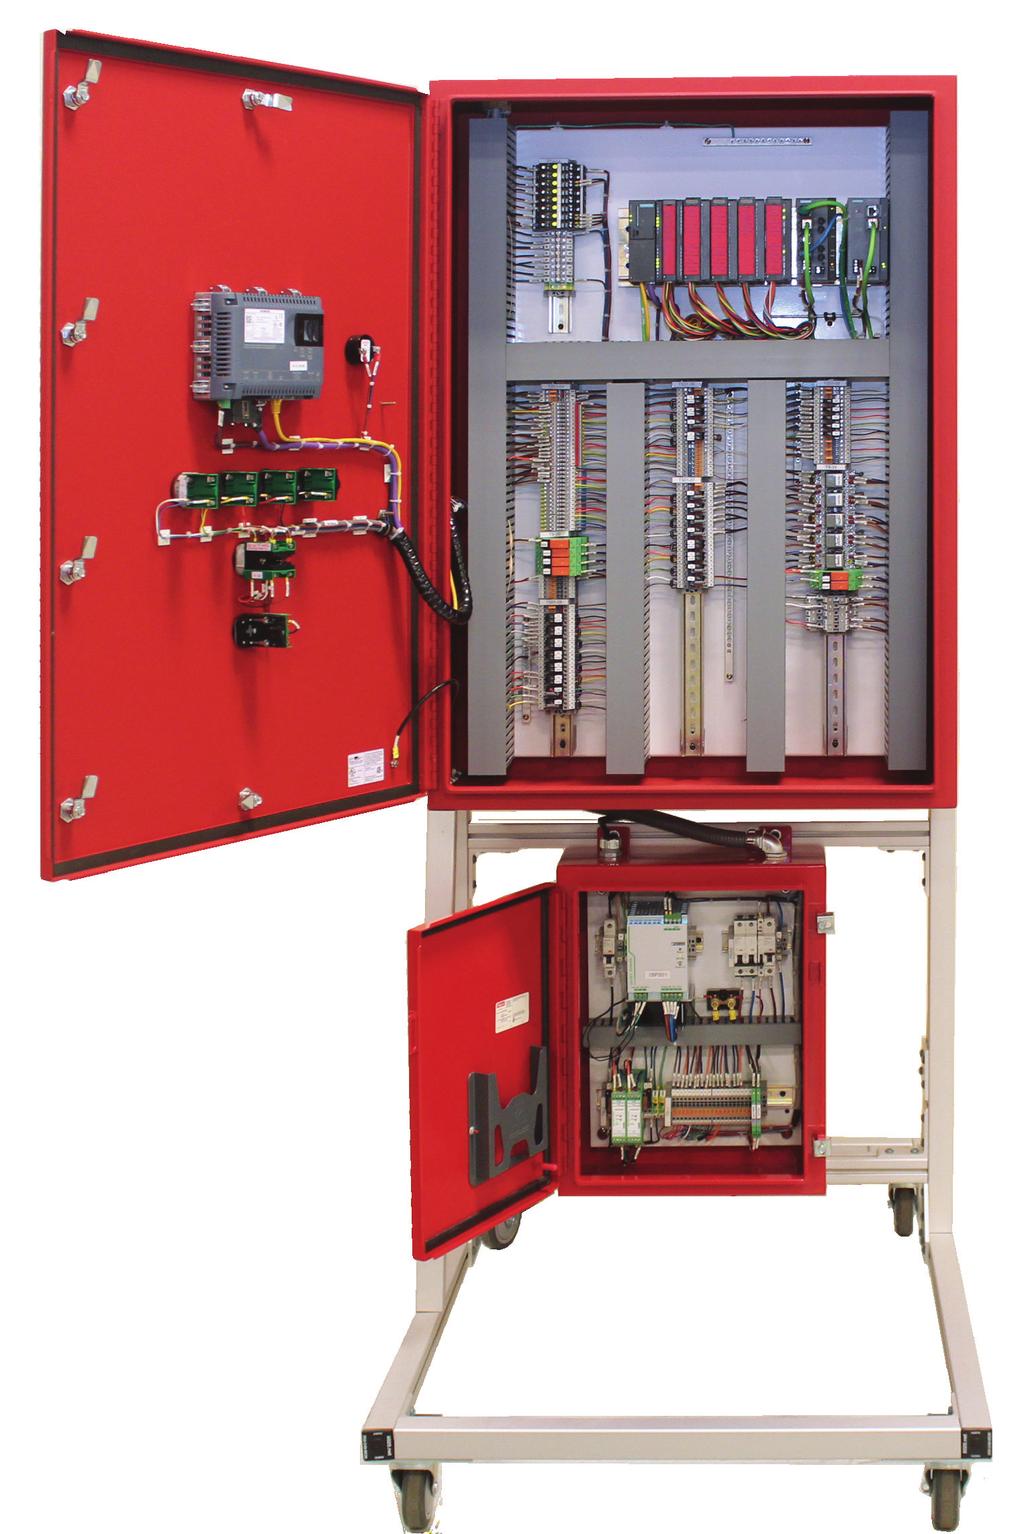 FGS1300 Fire & Gas Alarm & Control System Features The FGS1300 provides fire and gas monitoring, and suppression control for modules in remote locations that have less than 40 I/O.